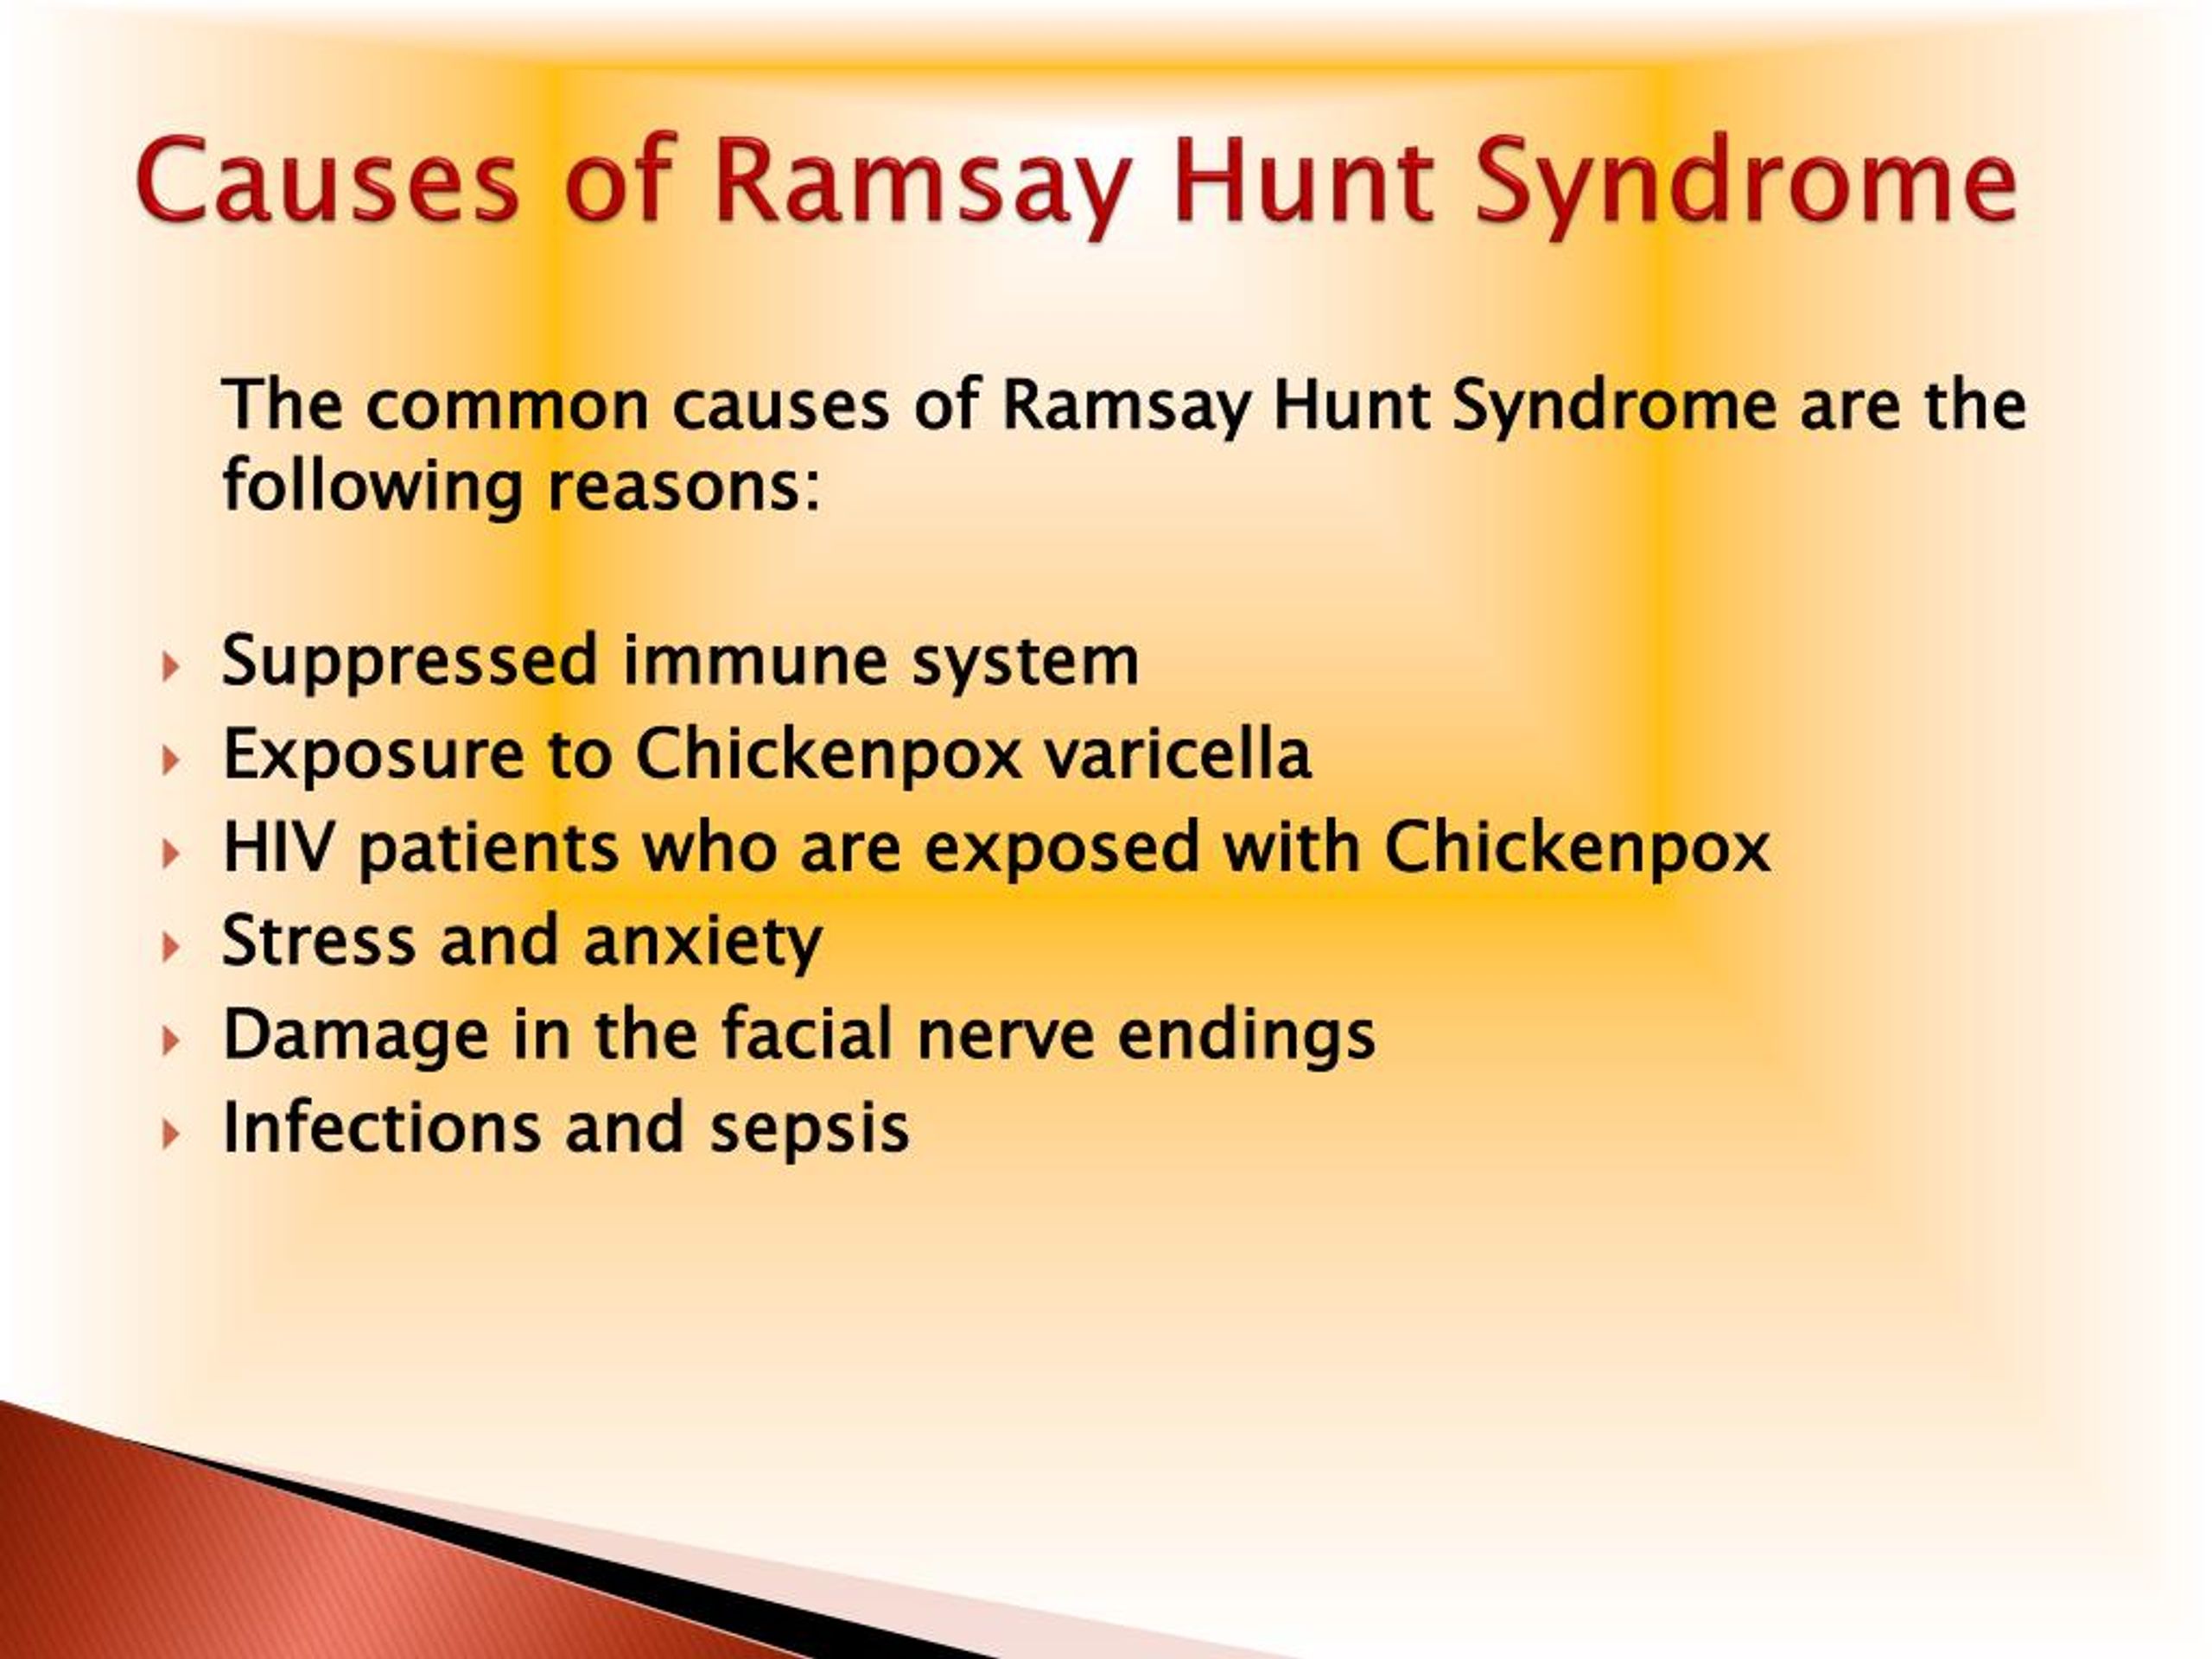 Ppt Ramsay Hunt Syndrome Causes Symptoms Daignosis Prevention And